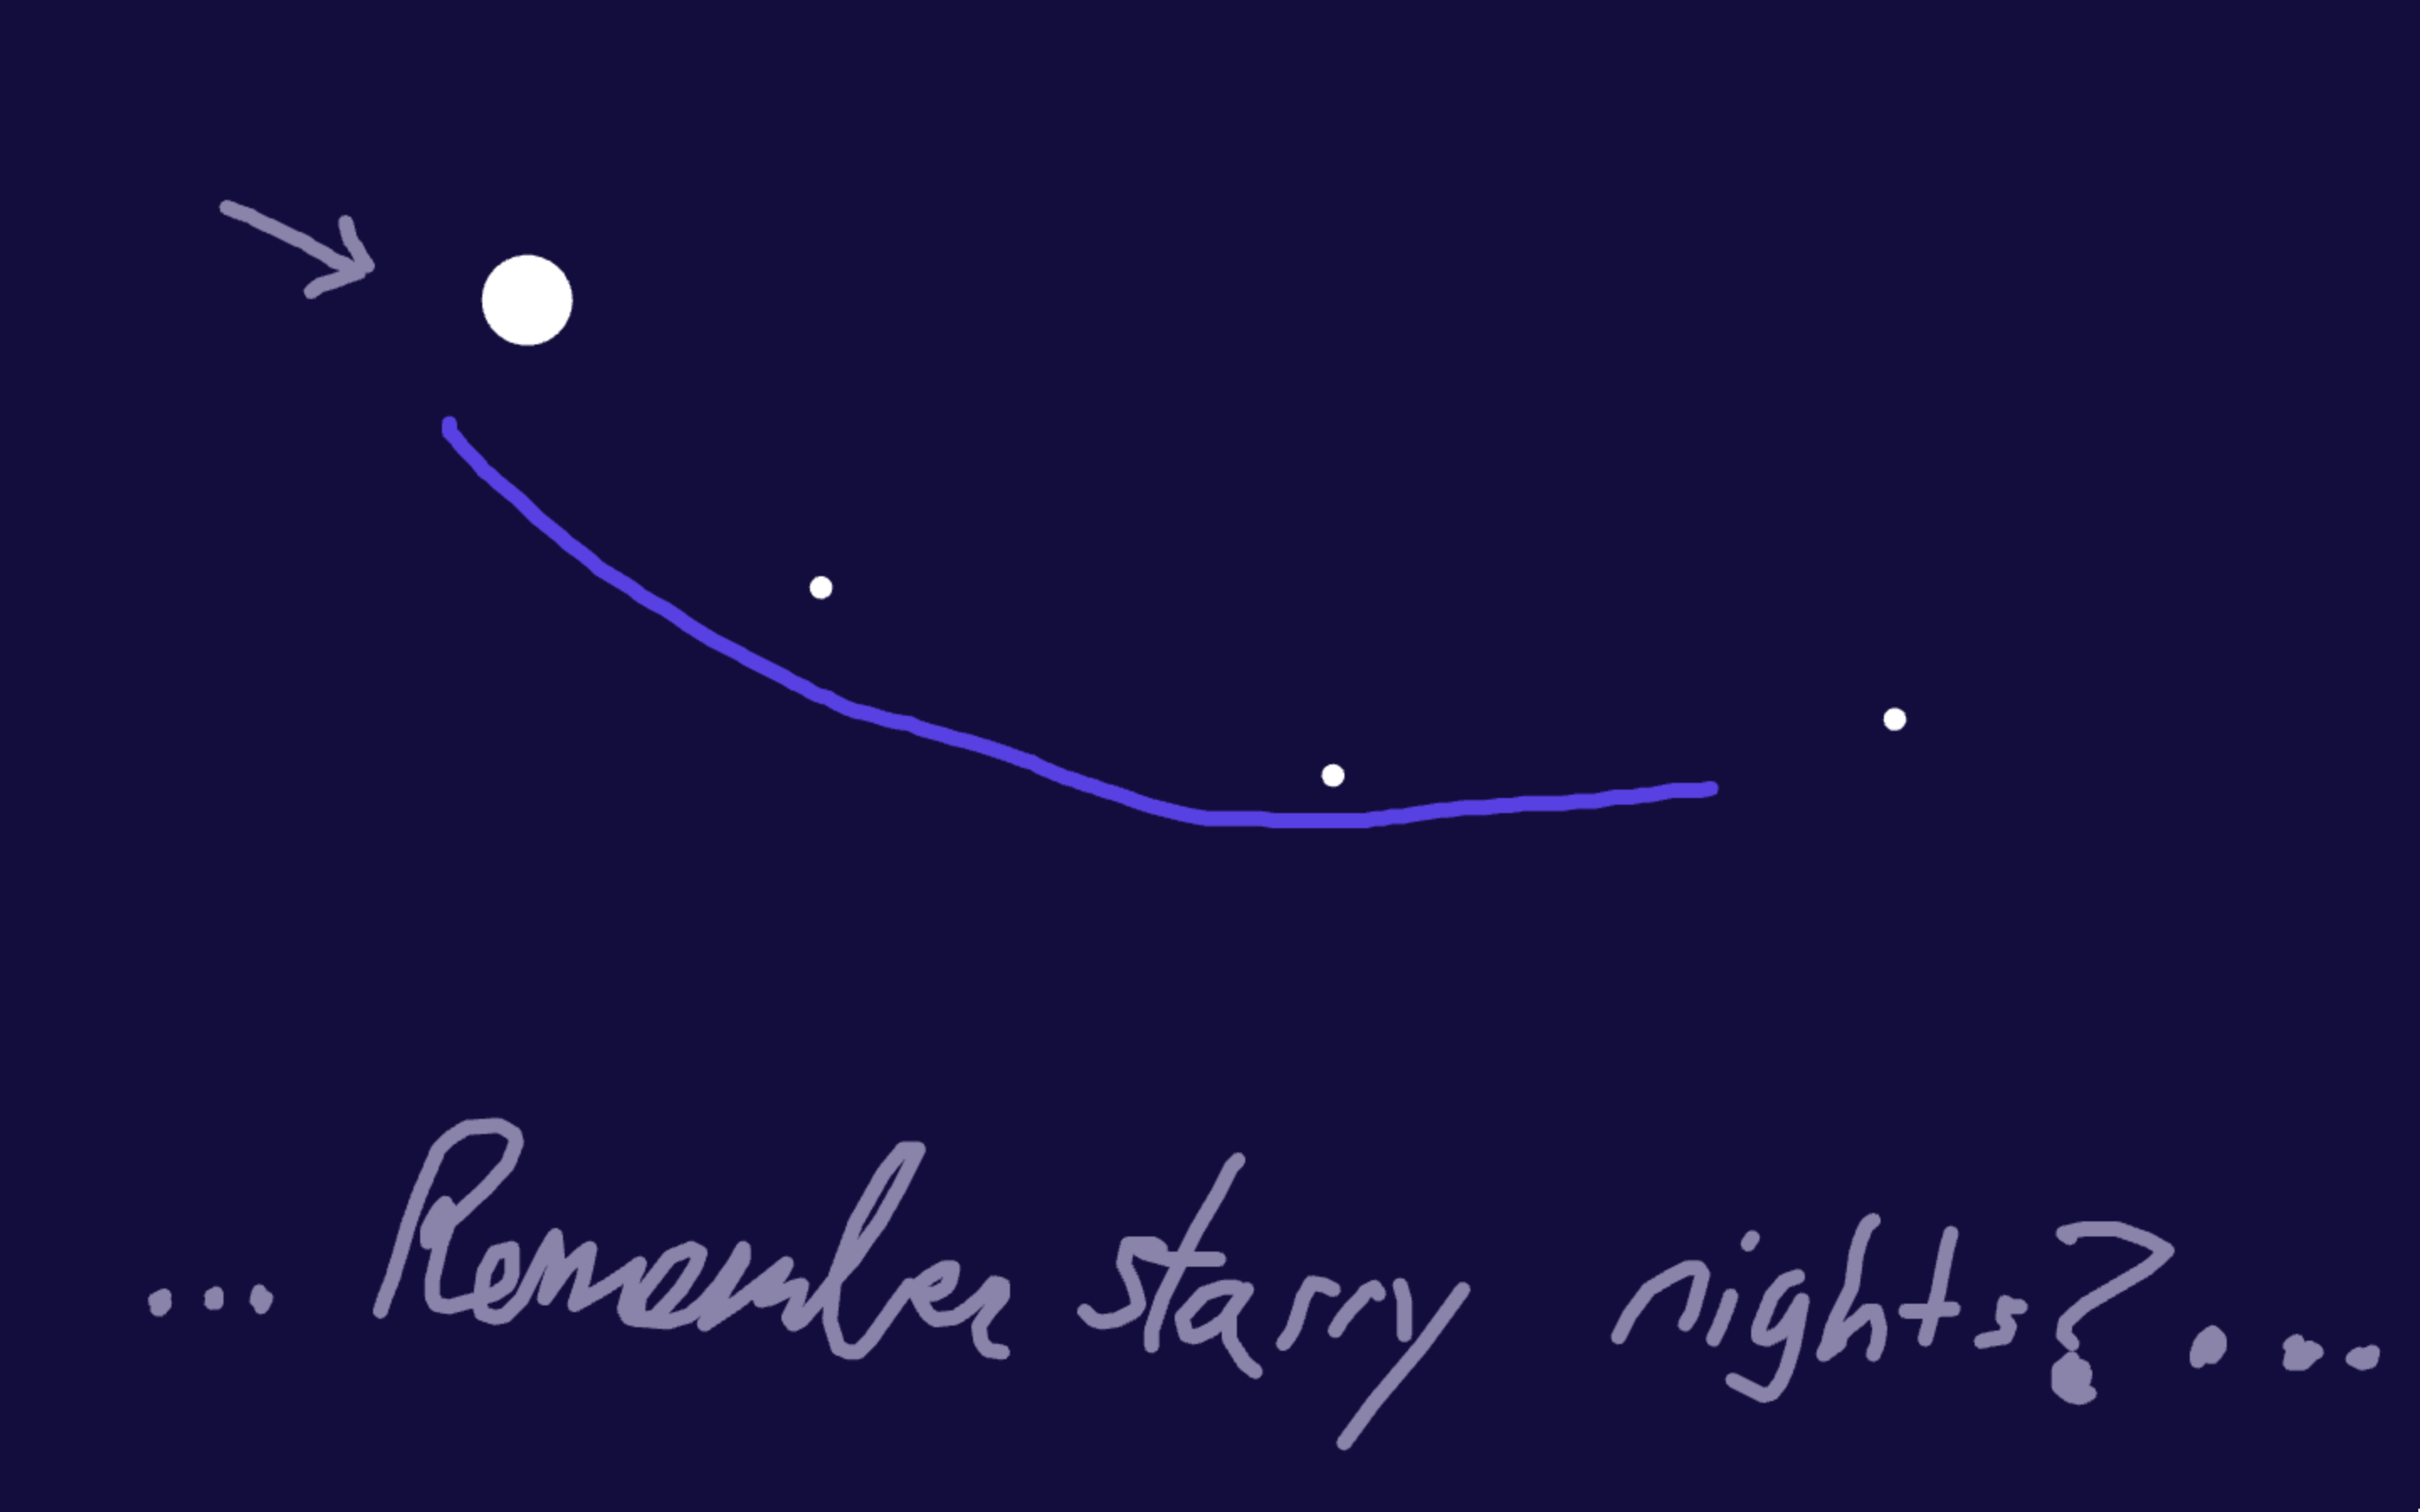 A screenshot of the game. The moon is about to roll along a line. Text at the bottom says 'Remember starry nights?'